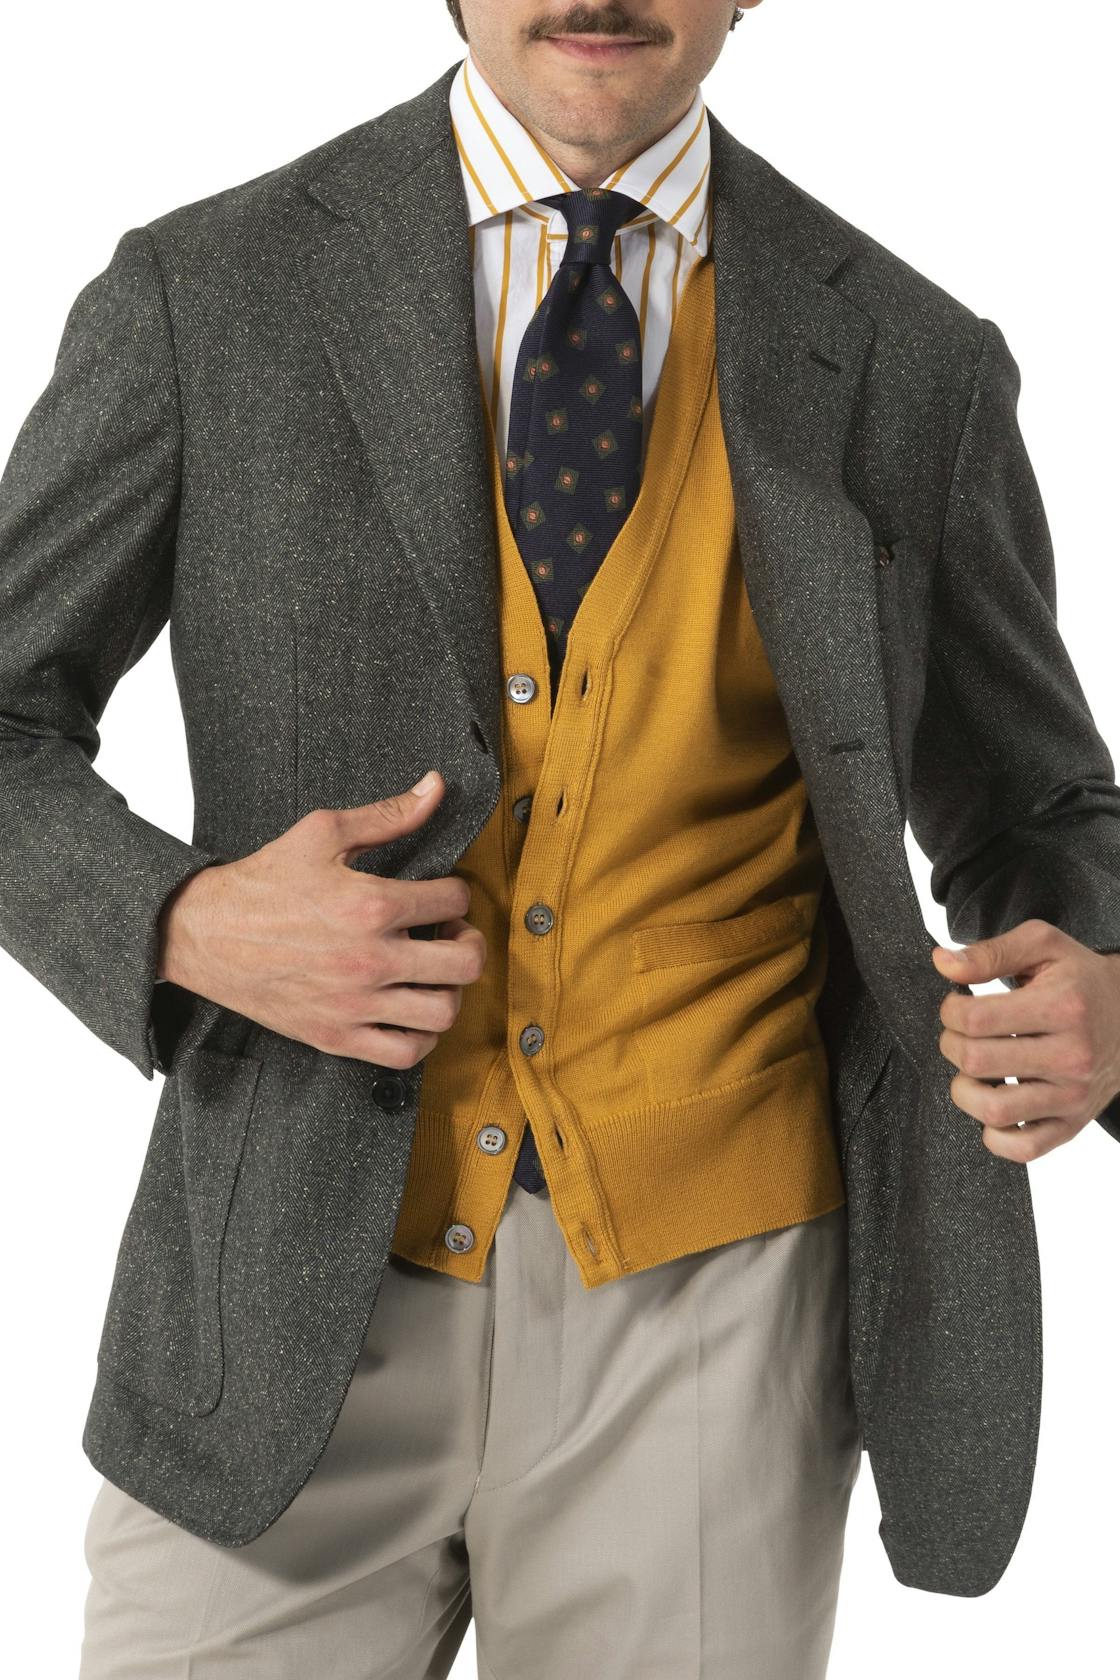 The Armoury by Ring Jacket Model 3 Olive Wool-Silk Donegal Herringbone Sport Coat